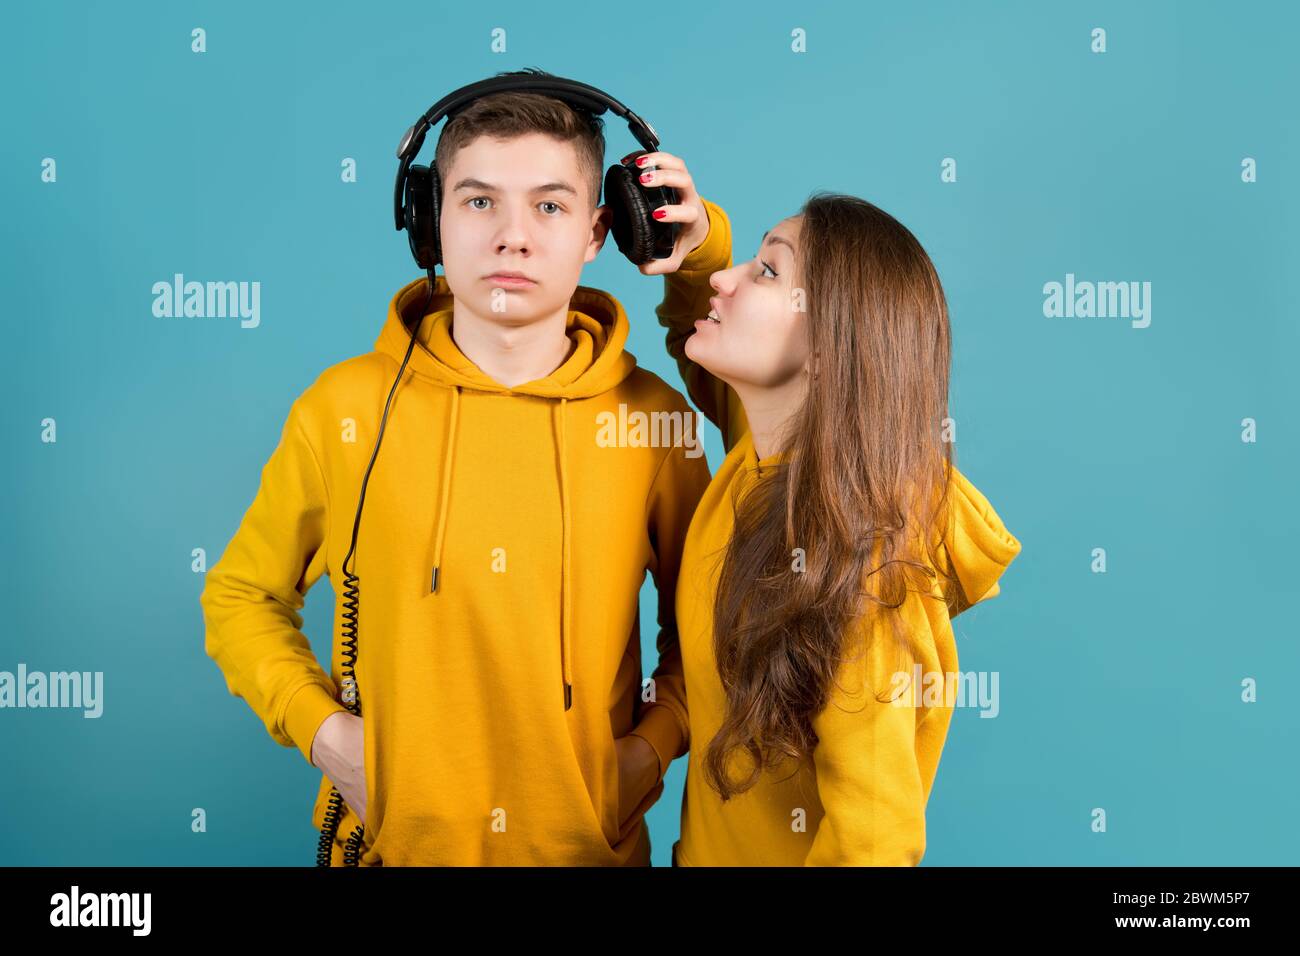 the girl pushes one earphone away from the guy in order to tell him something in the ear Stock Photo